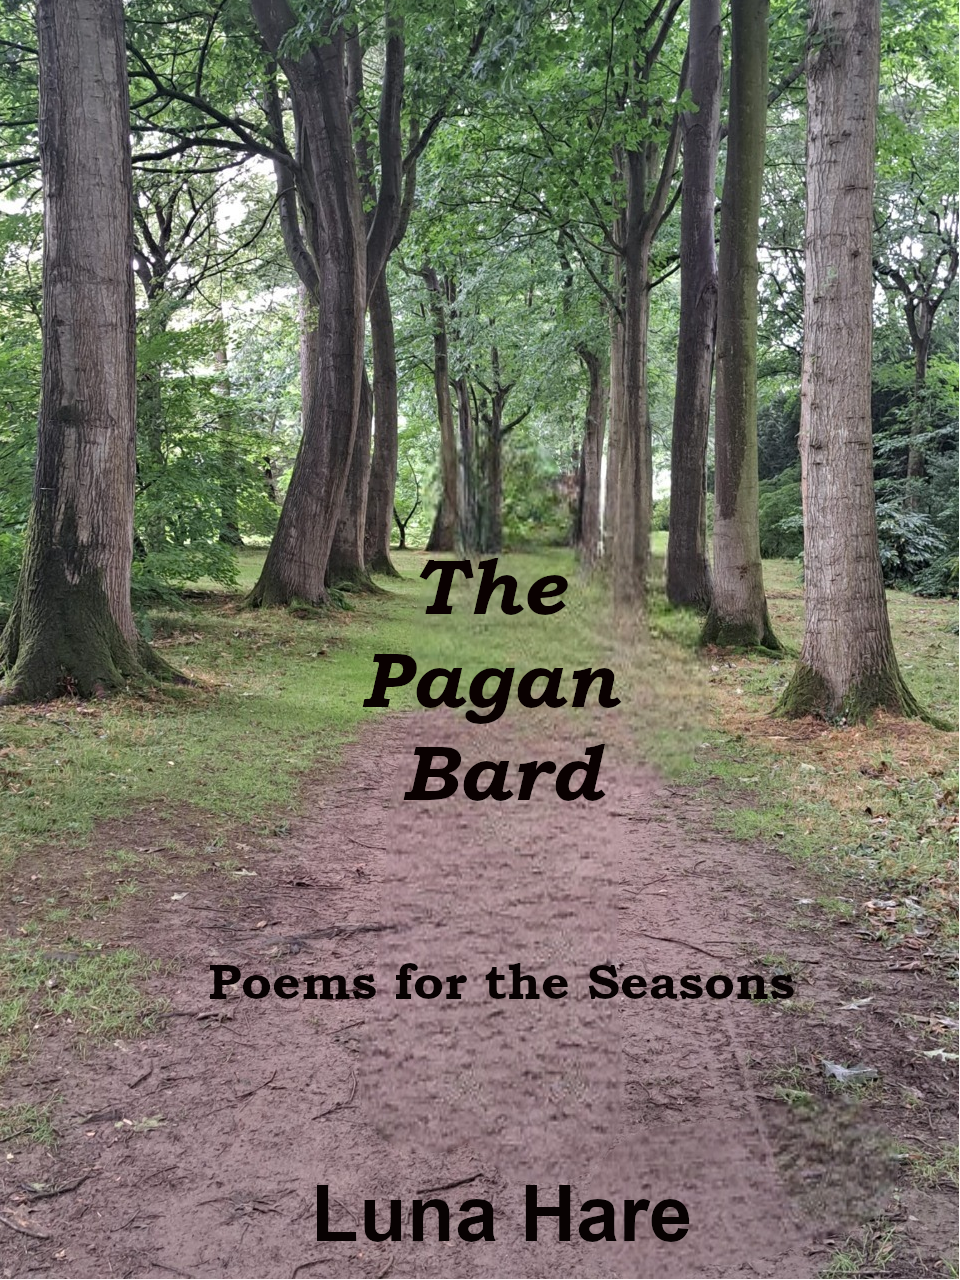 Book Review: The Pagan Bard by Luna Hare